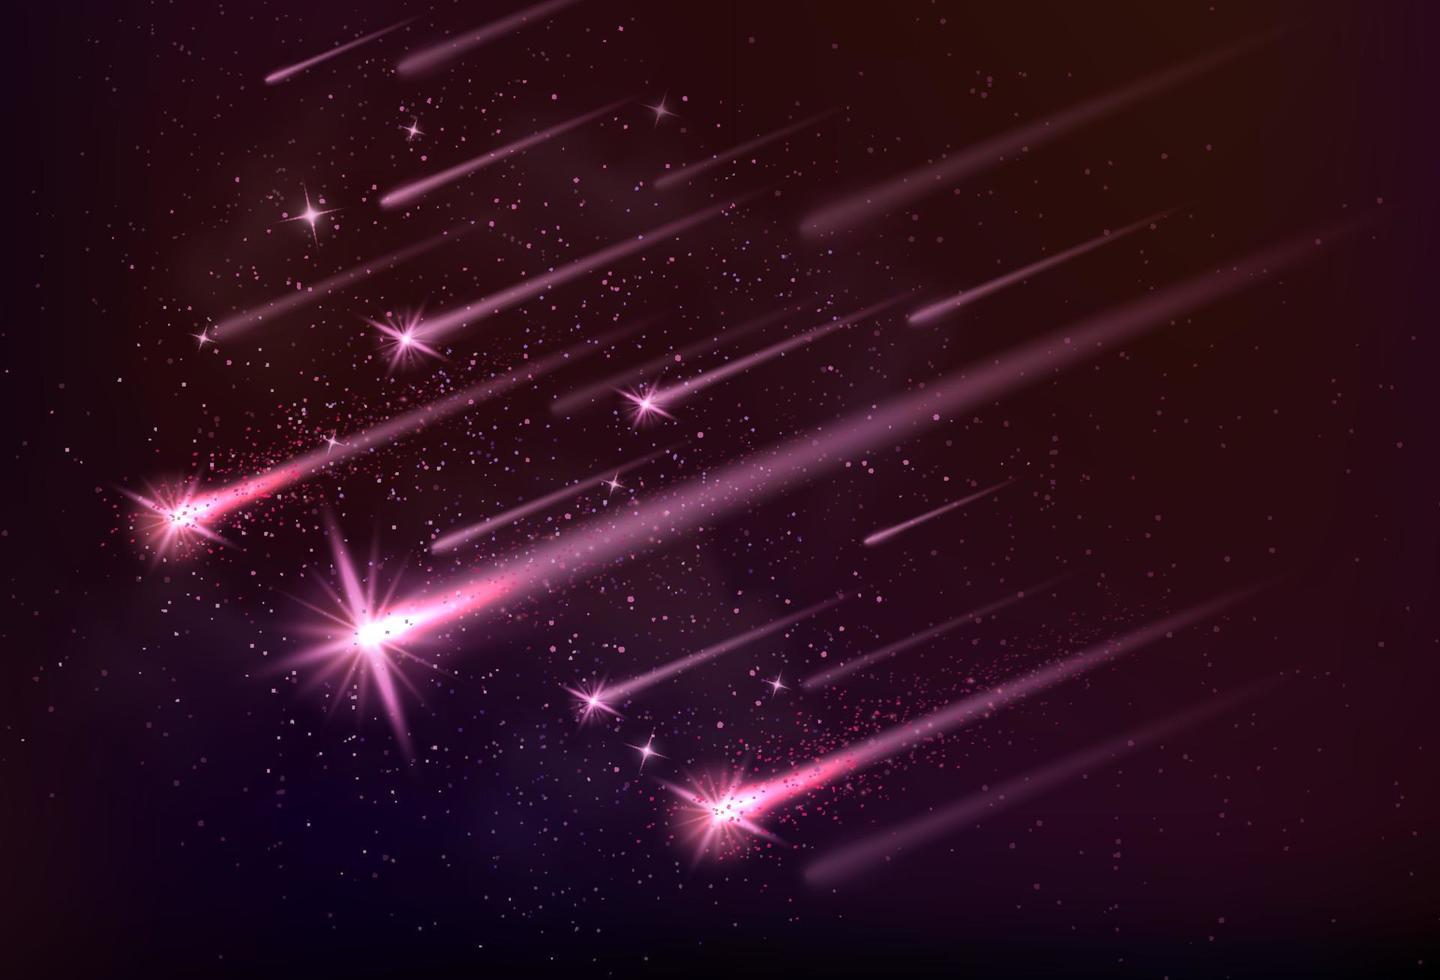 Meteor shower background with falling glowing comets asteroids and stars in space vector illustration